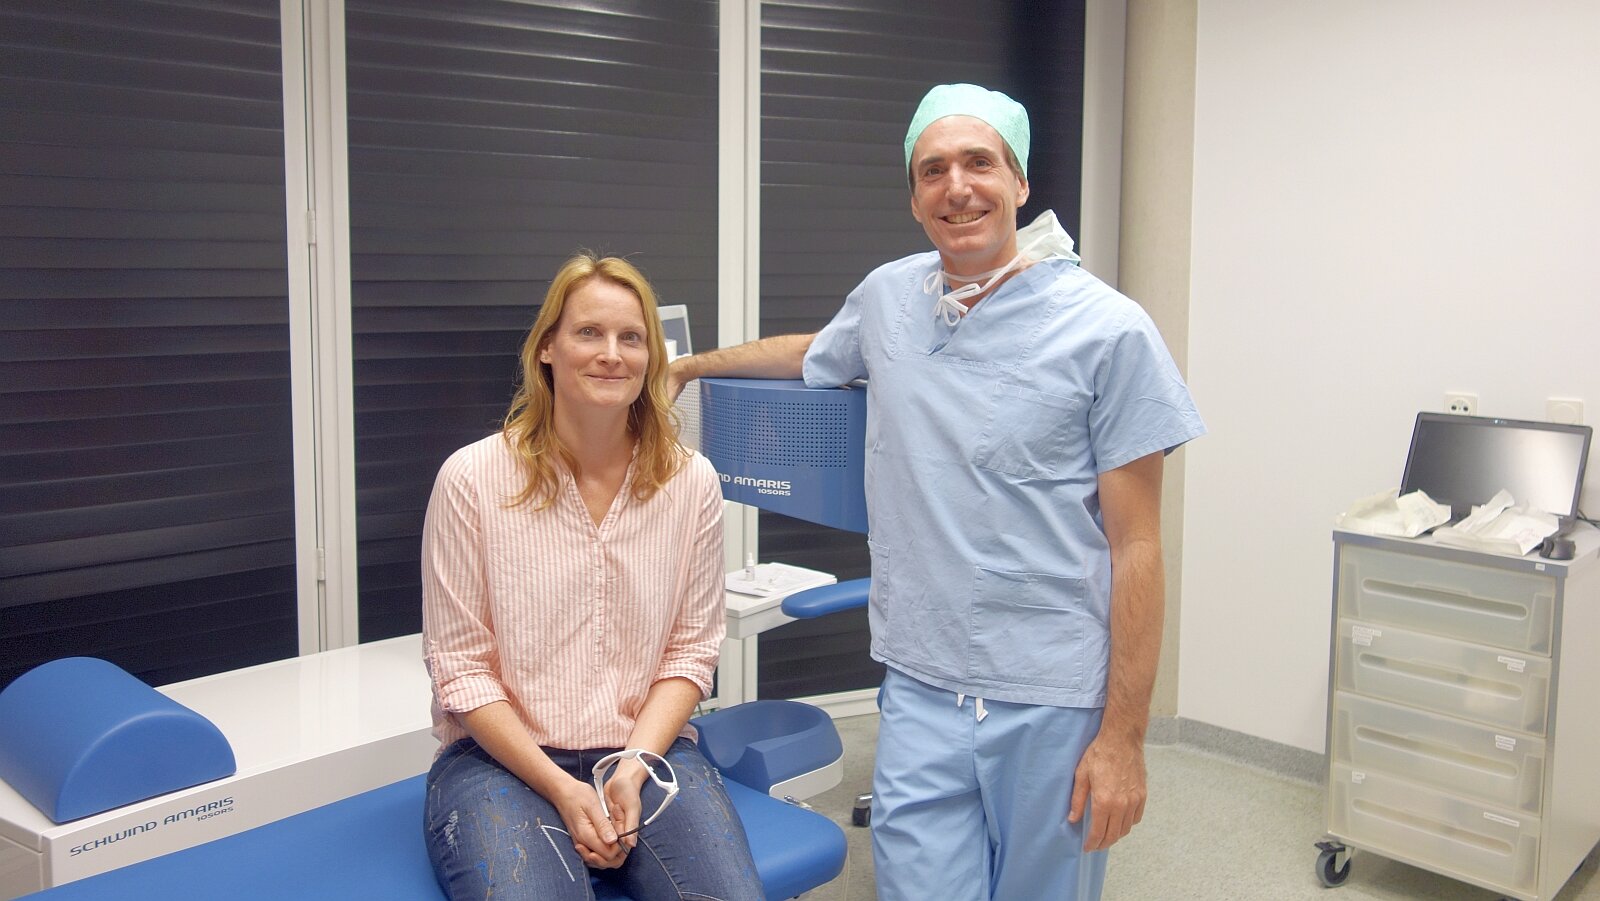 Client Nadine Dietrich with her attending physician Dr. de Ortueta